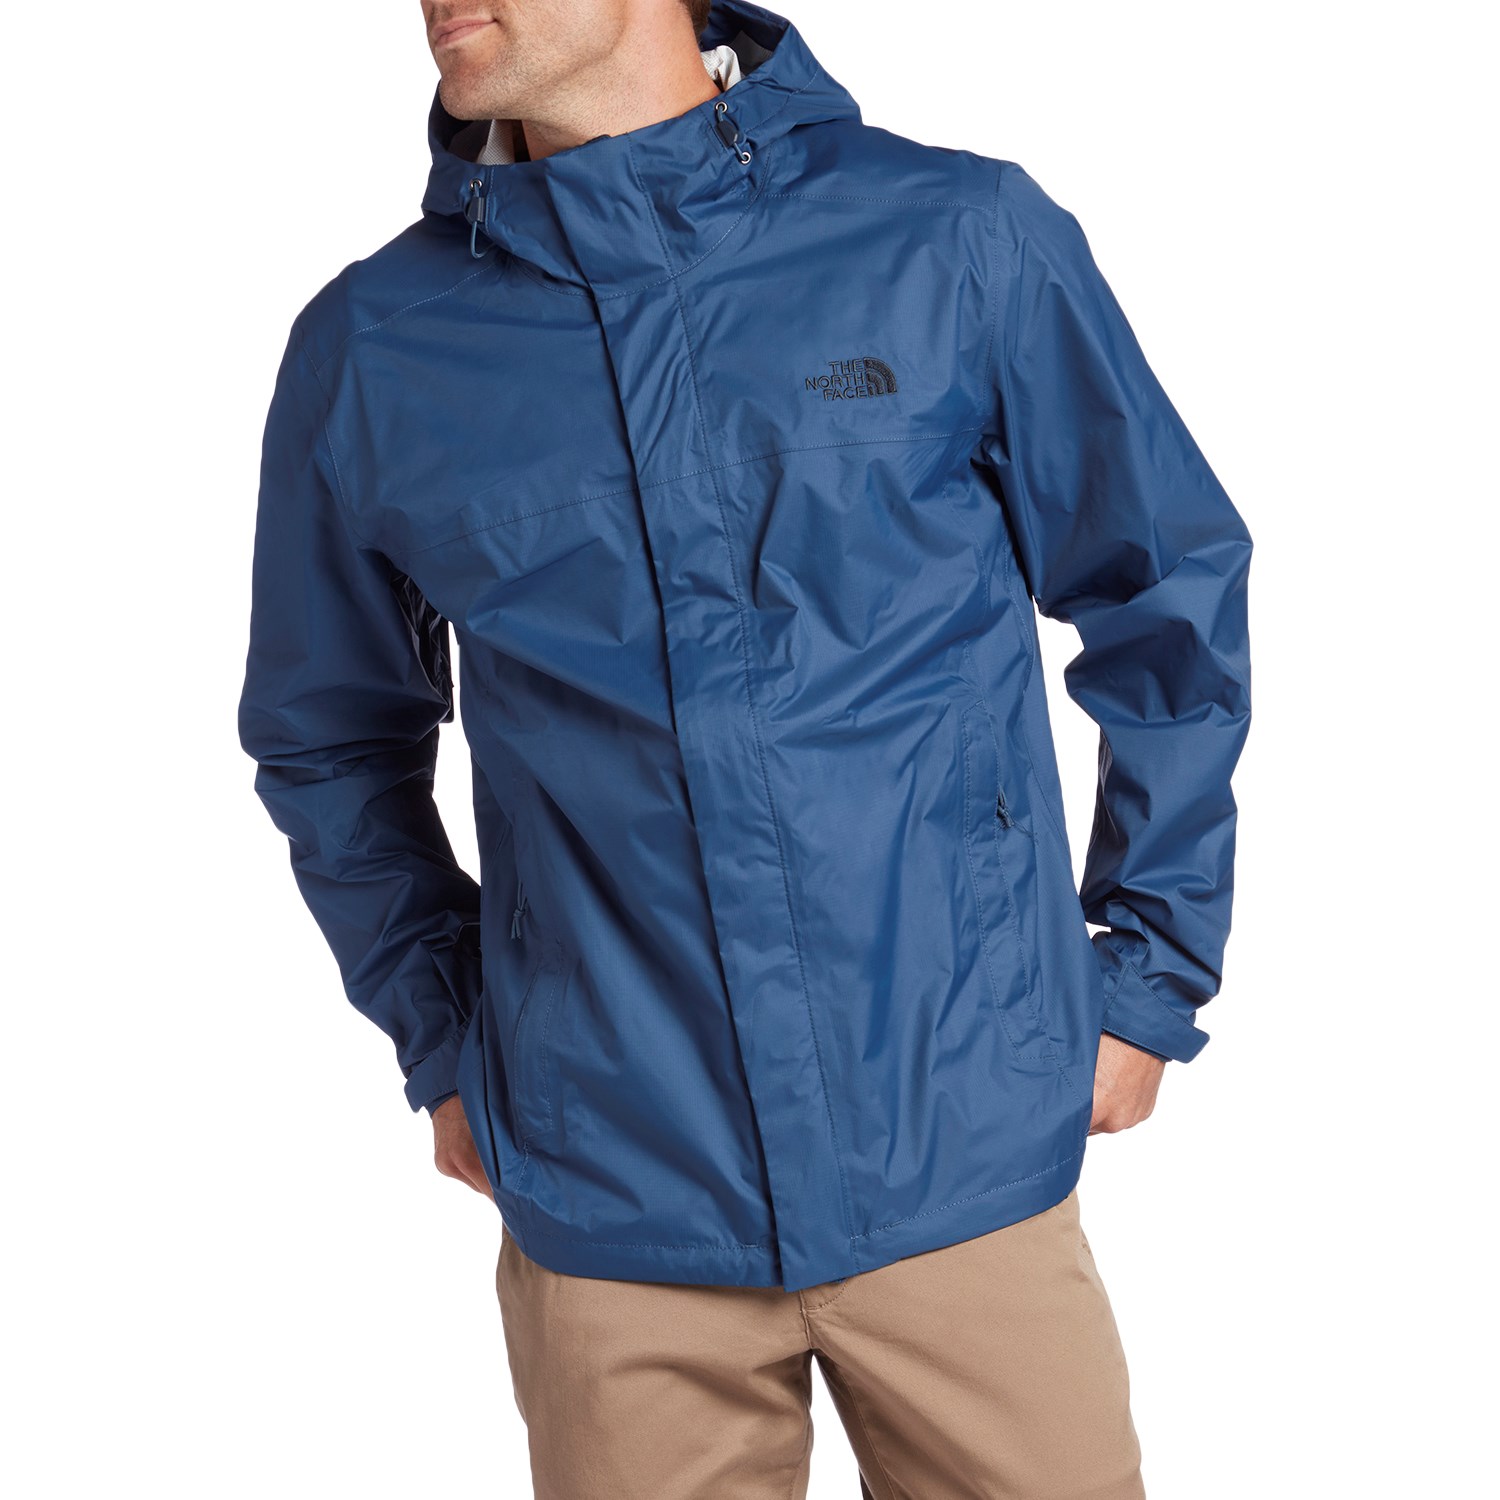 The North Face Venture 2 Jacket | evo